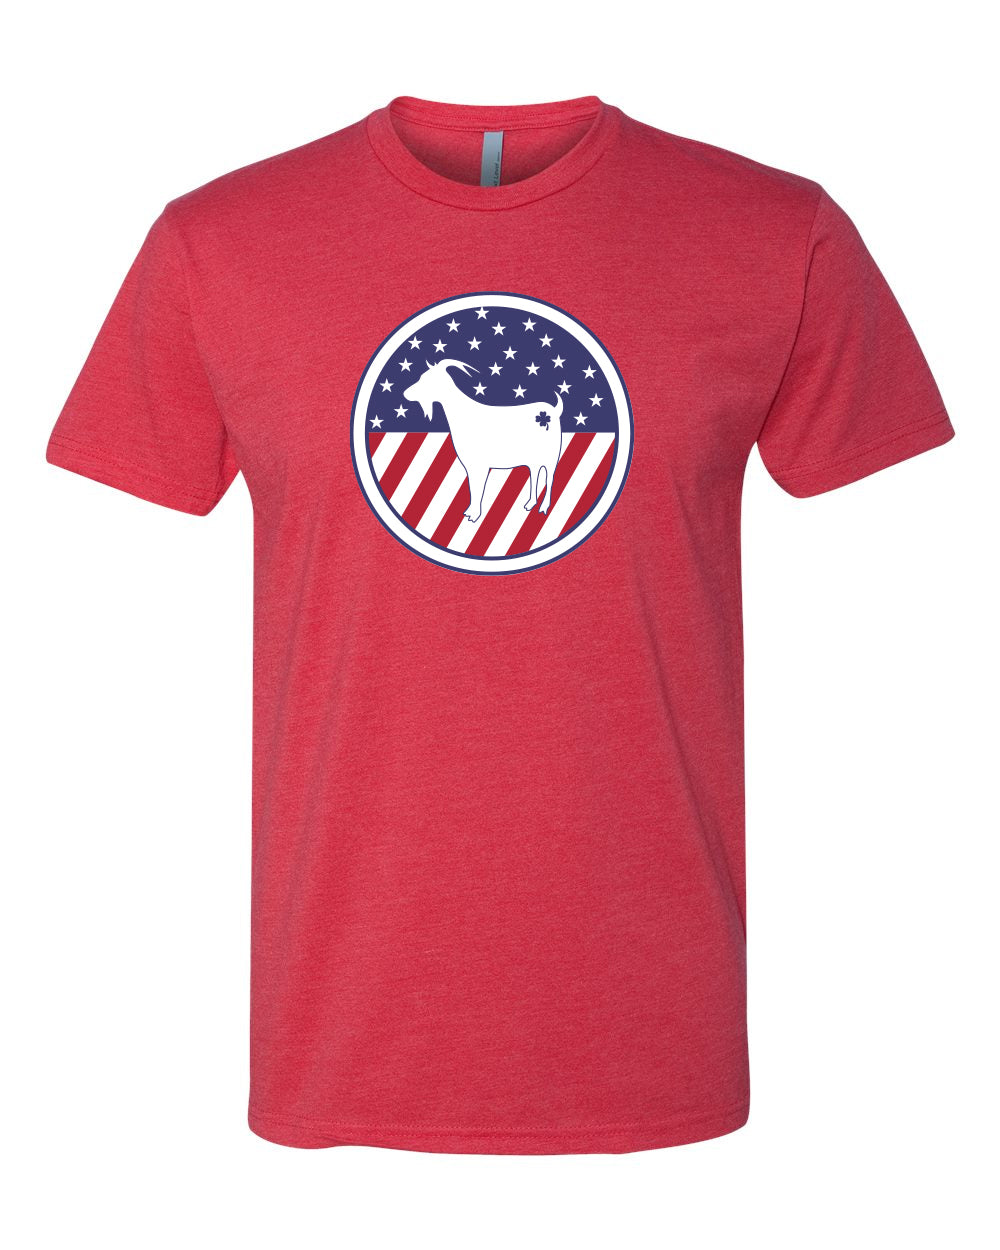 OneGoat Stars and stripes T-shirt - Men's